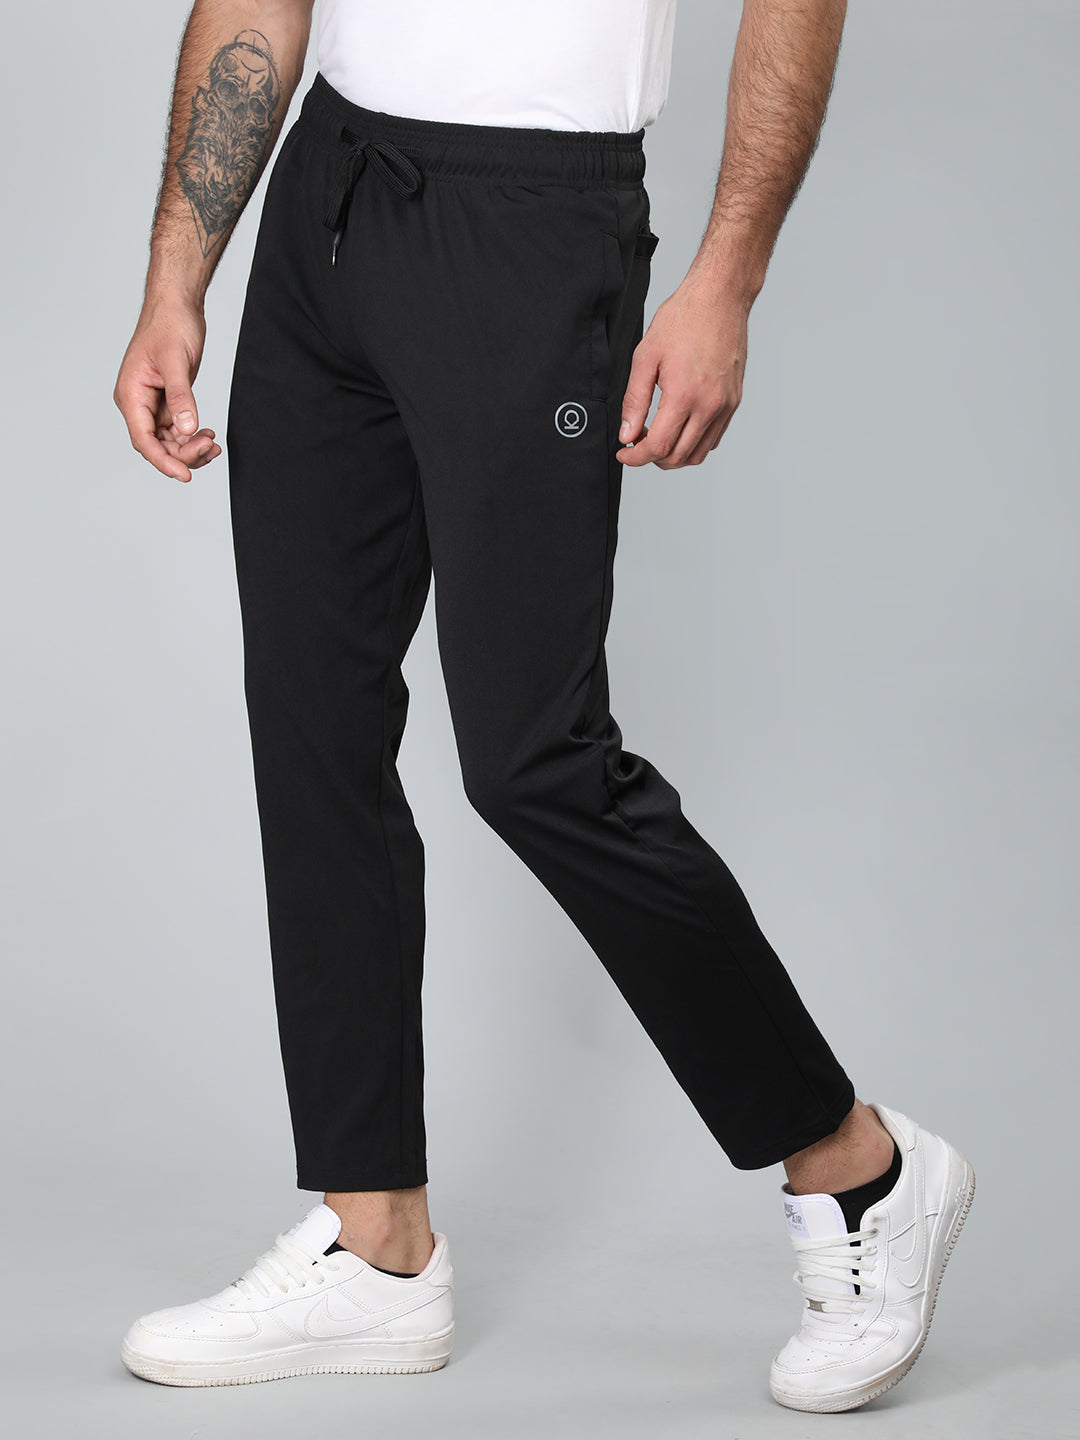 Men Sports Gym Trackpant Running Lower With Pocket